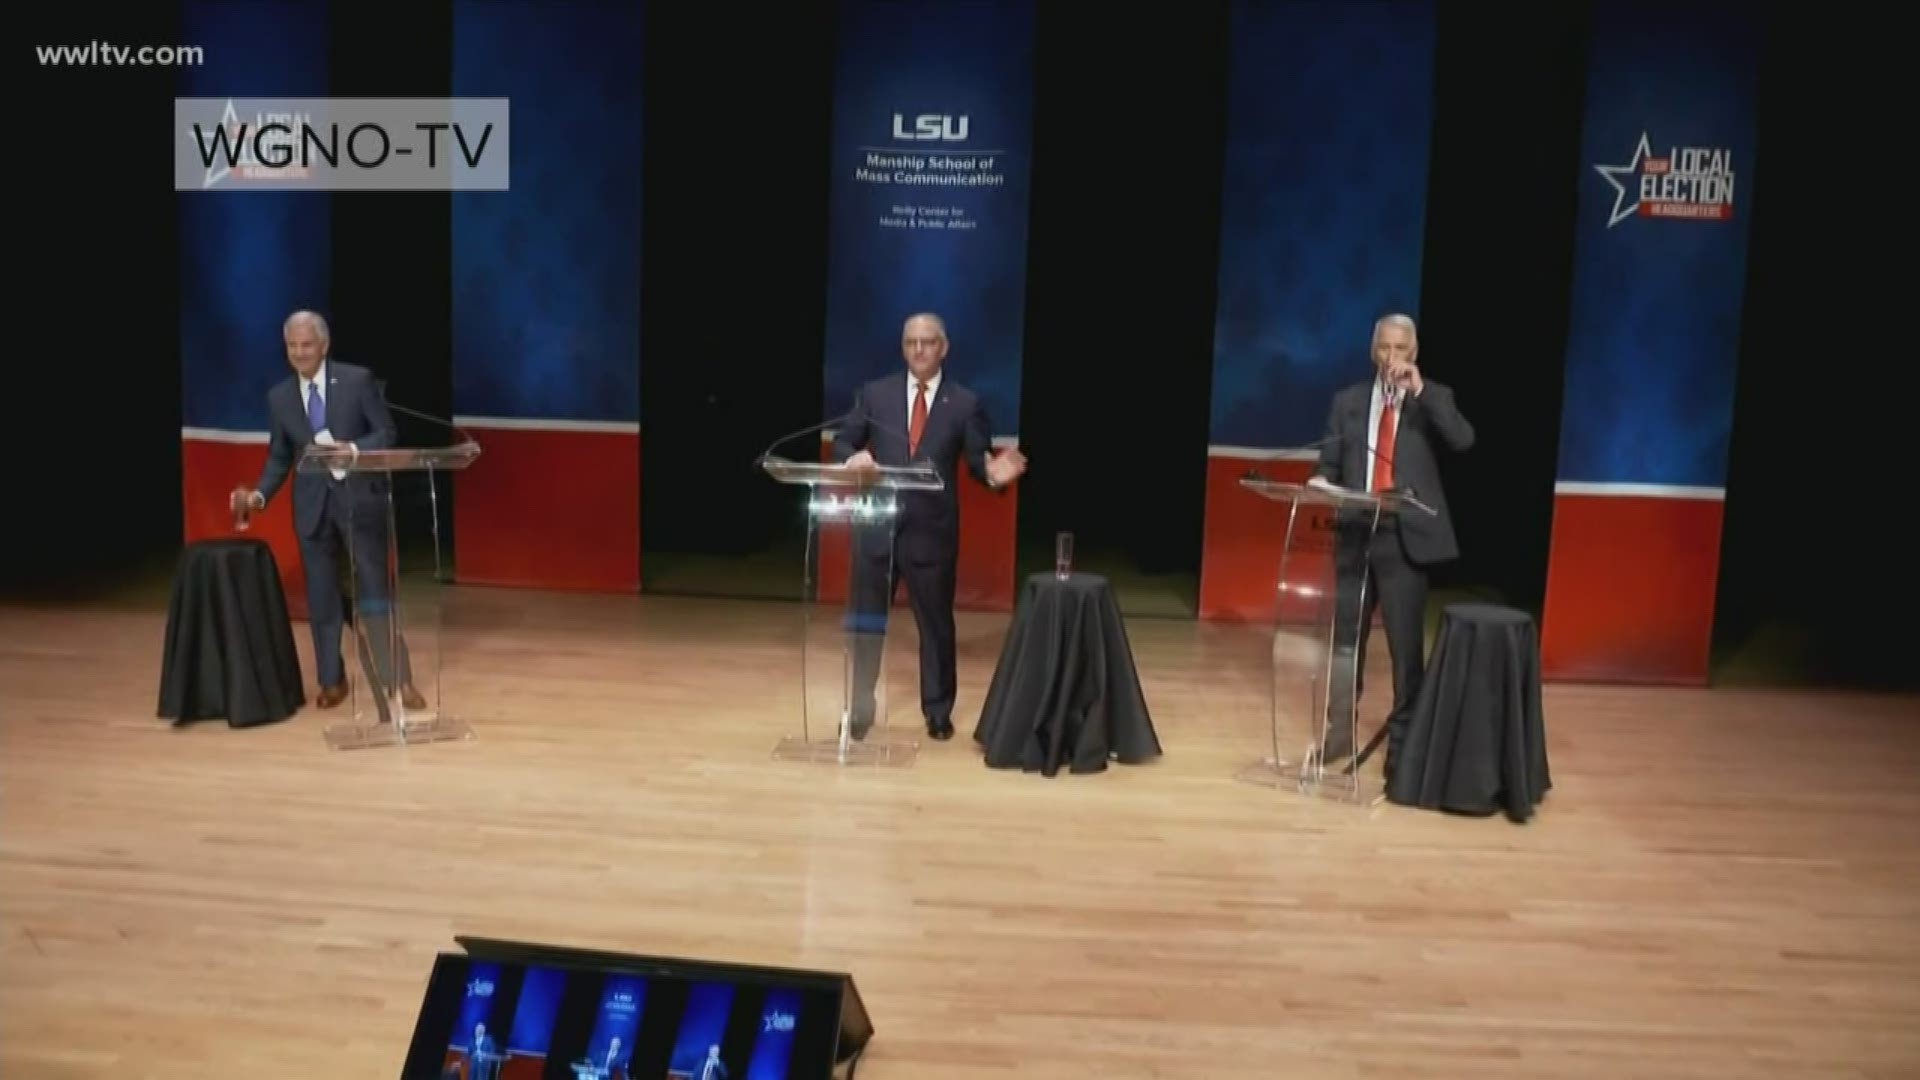 In a televised debate, the three contenders for Louisiana governor sparred over a myriad of issues in a spirited face-off.